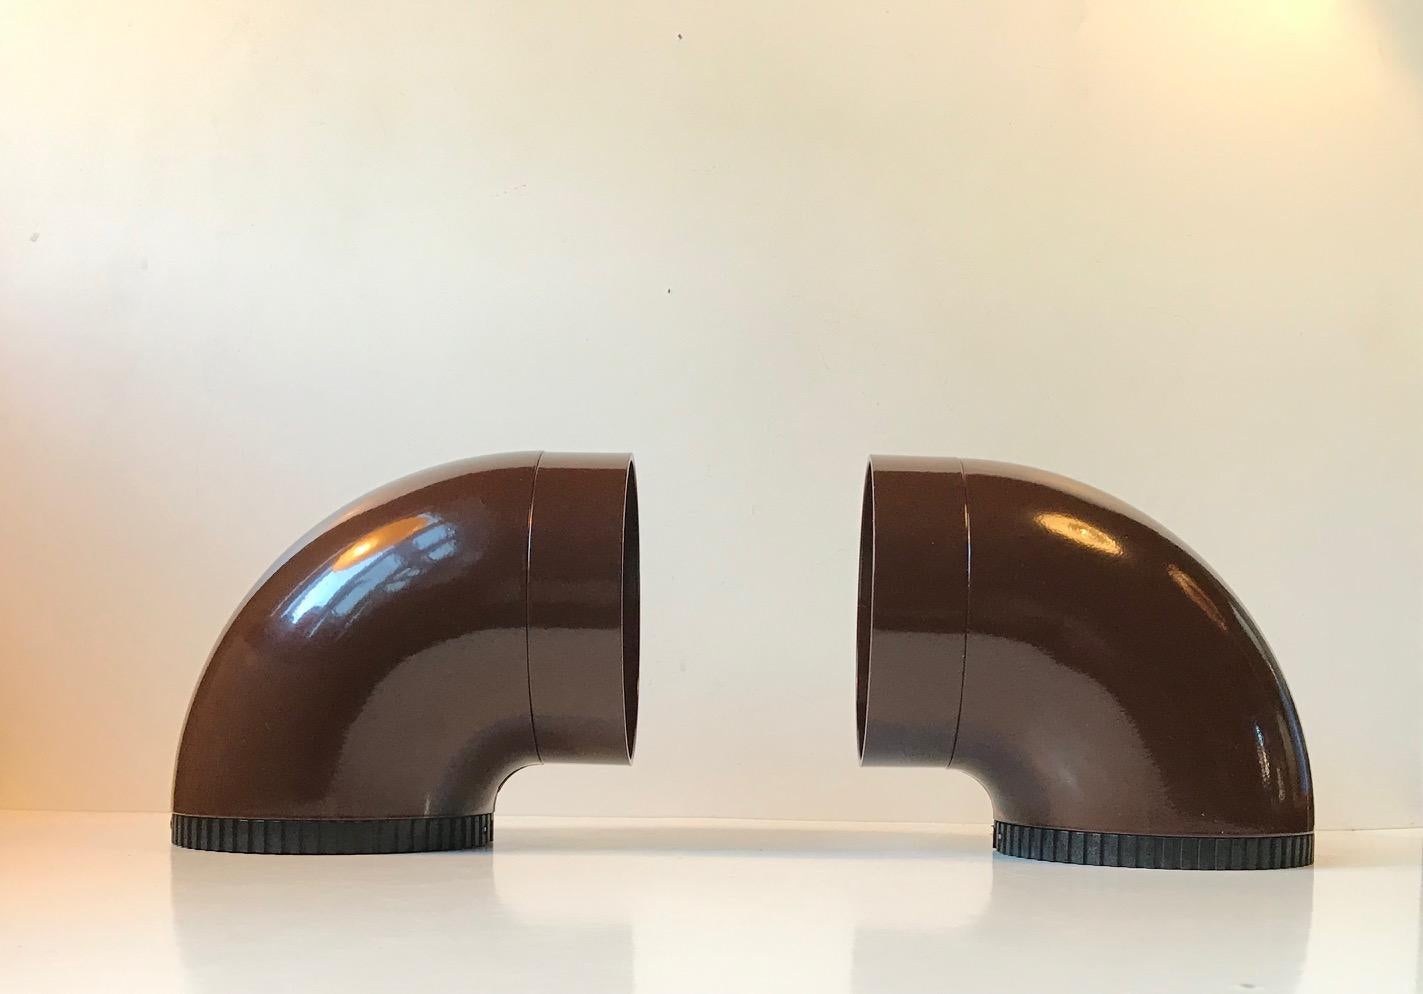 This is a pair of wall sconces by the Danish architect Ole Pless. They were manufactured by Nordisk Solar Kompagni in Denmark during the 1970s. The lights is for indoor as well as outdoor use. These lights have never been installed or used and one